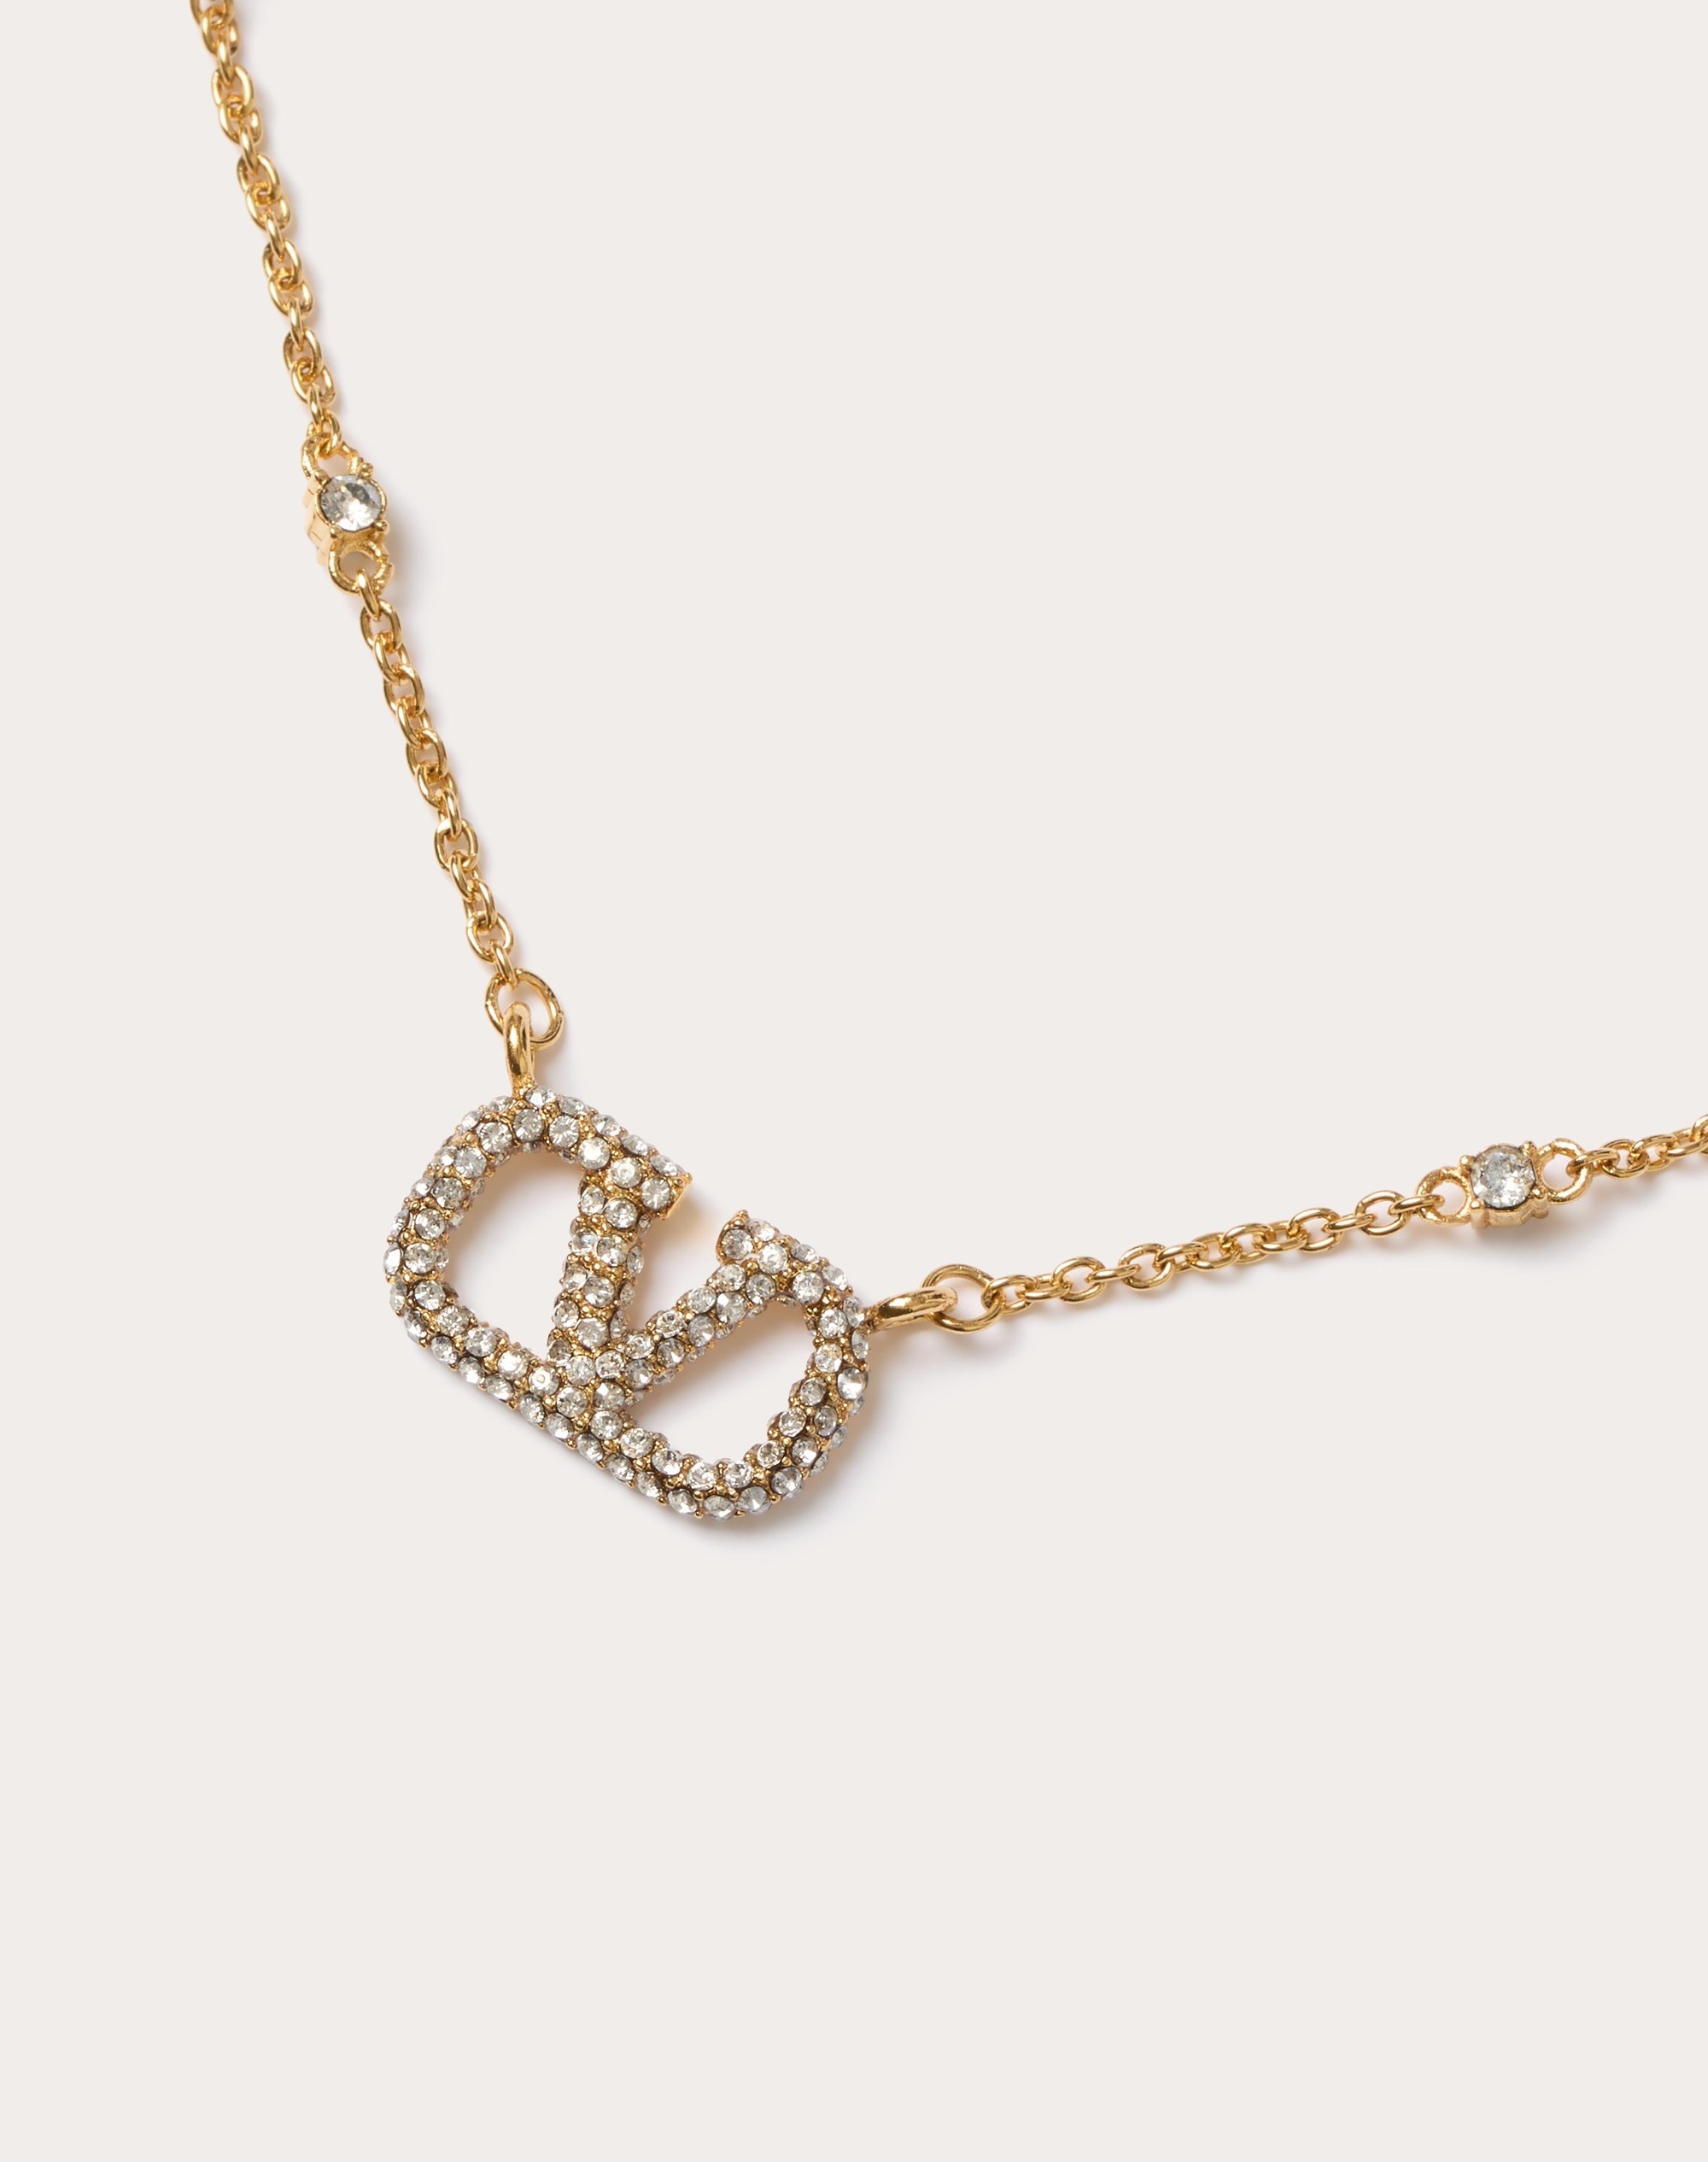 VLOGO SIGNATURE METAL NECKLACE WITH SWAROVSKI® CRYSTALS AND PEARLS - 2